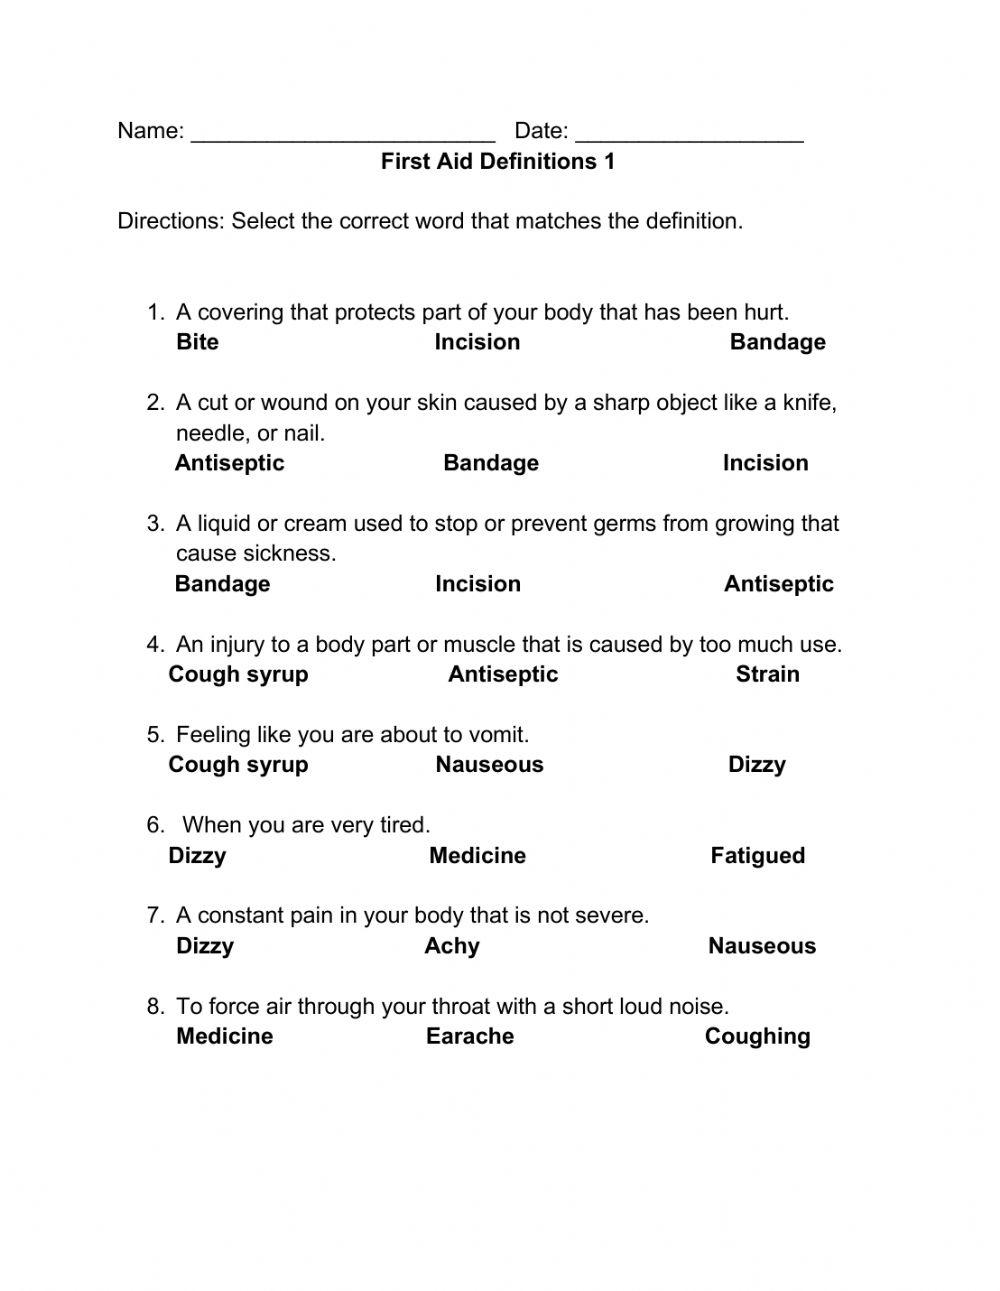 First Aid Definitions 1